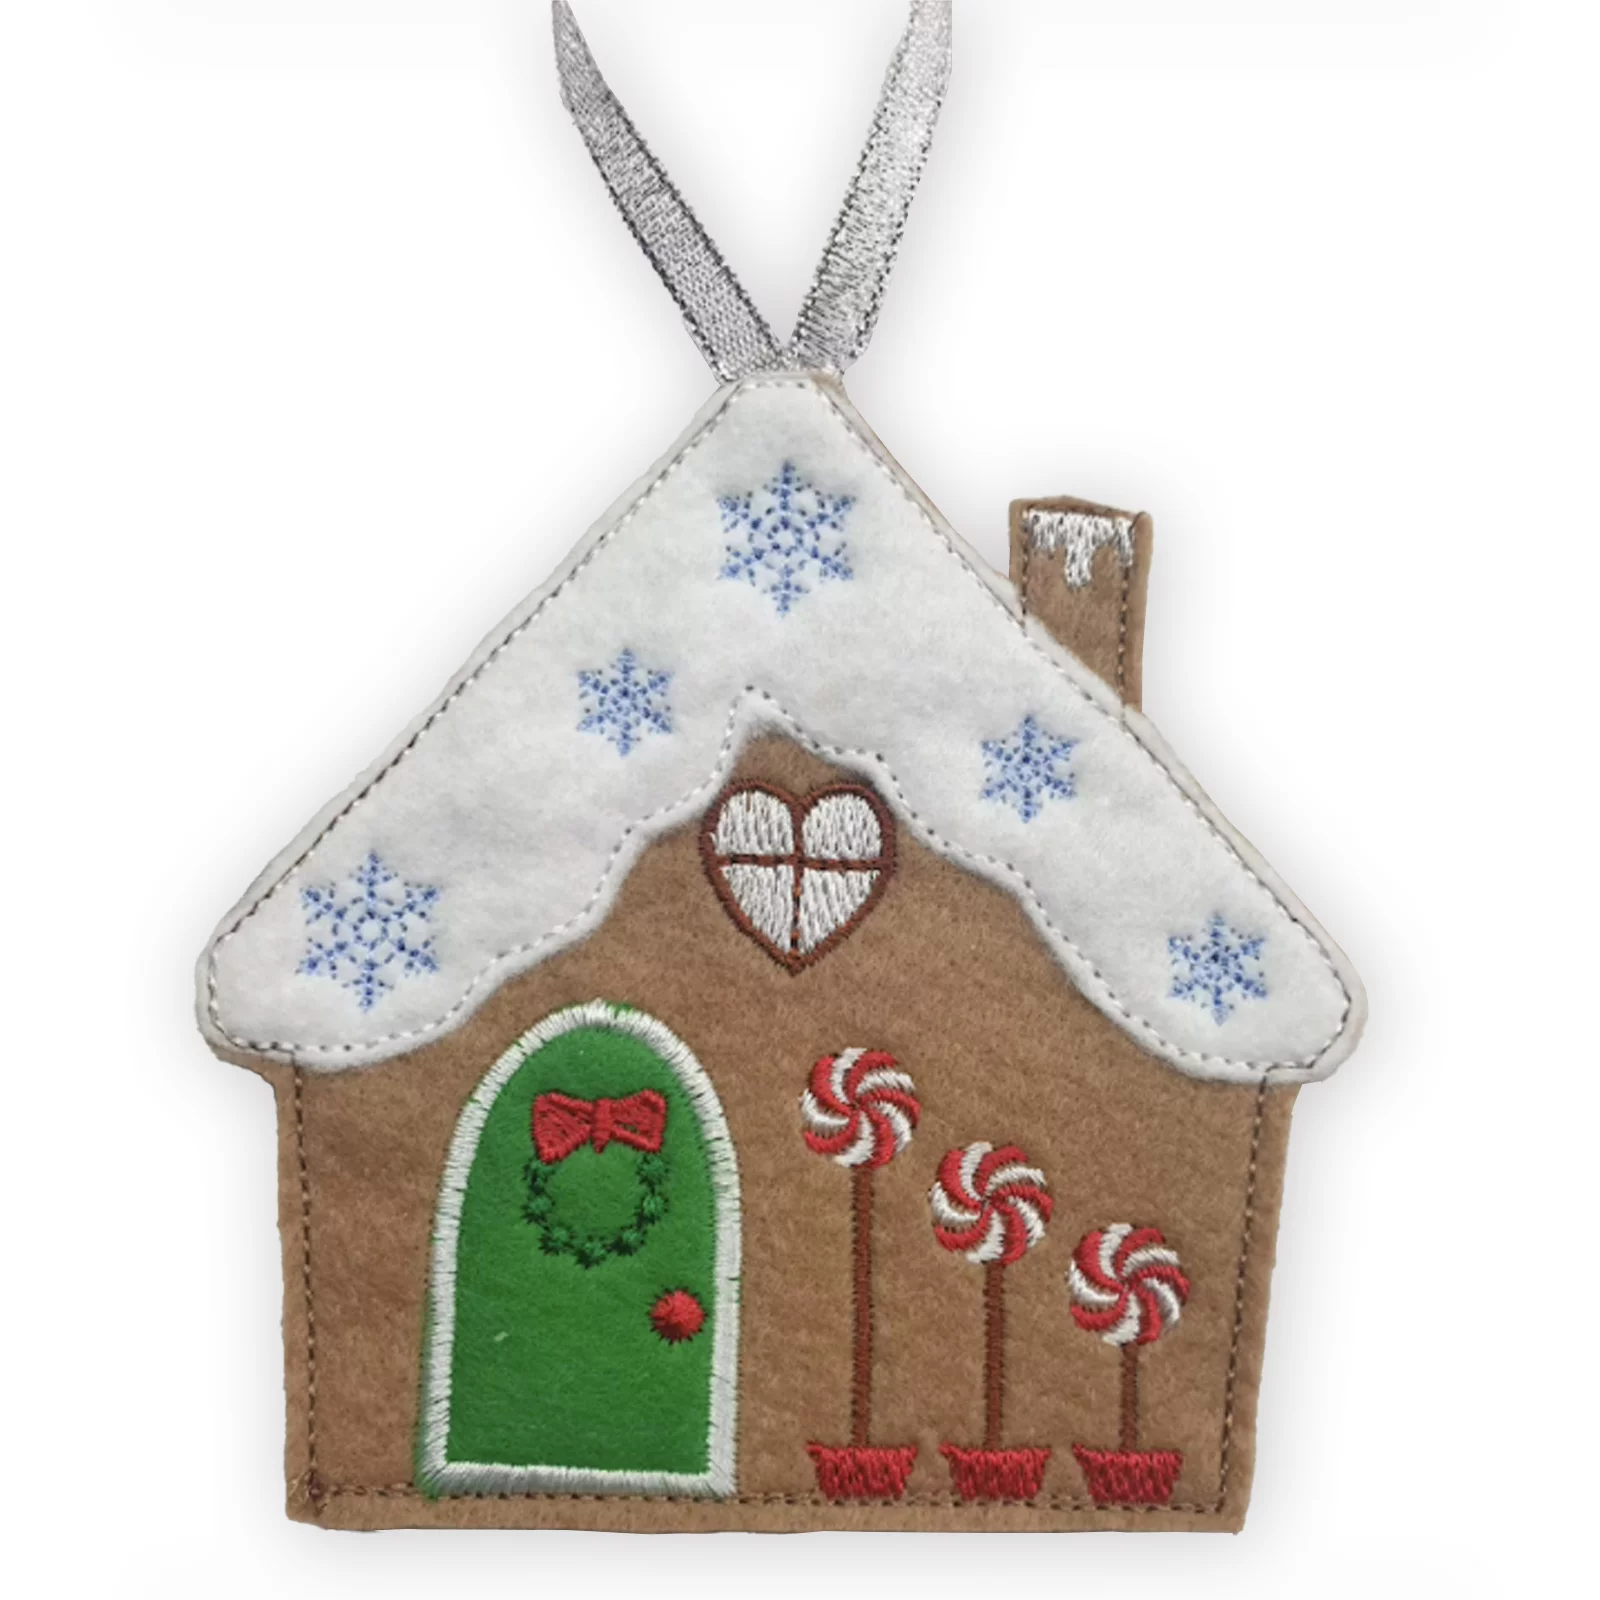 Felt Gingerbread House Christmas Tree Decoration with Candy Swirls